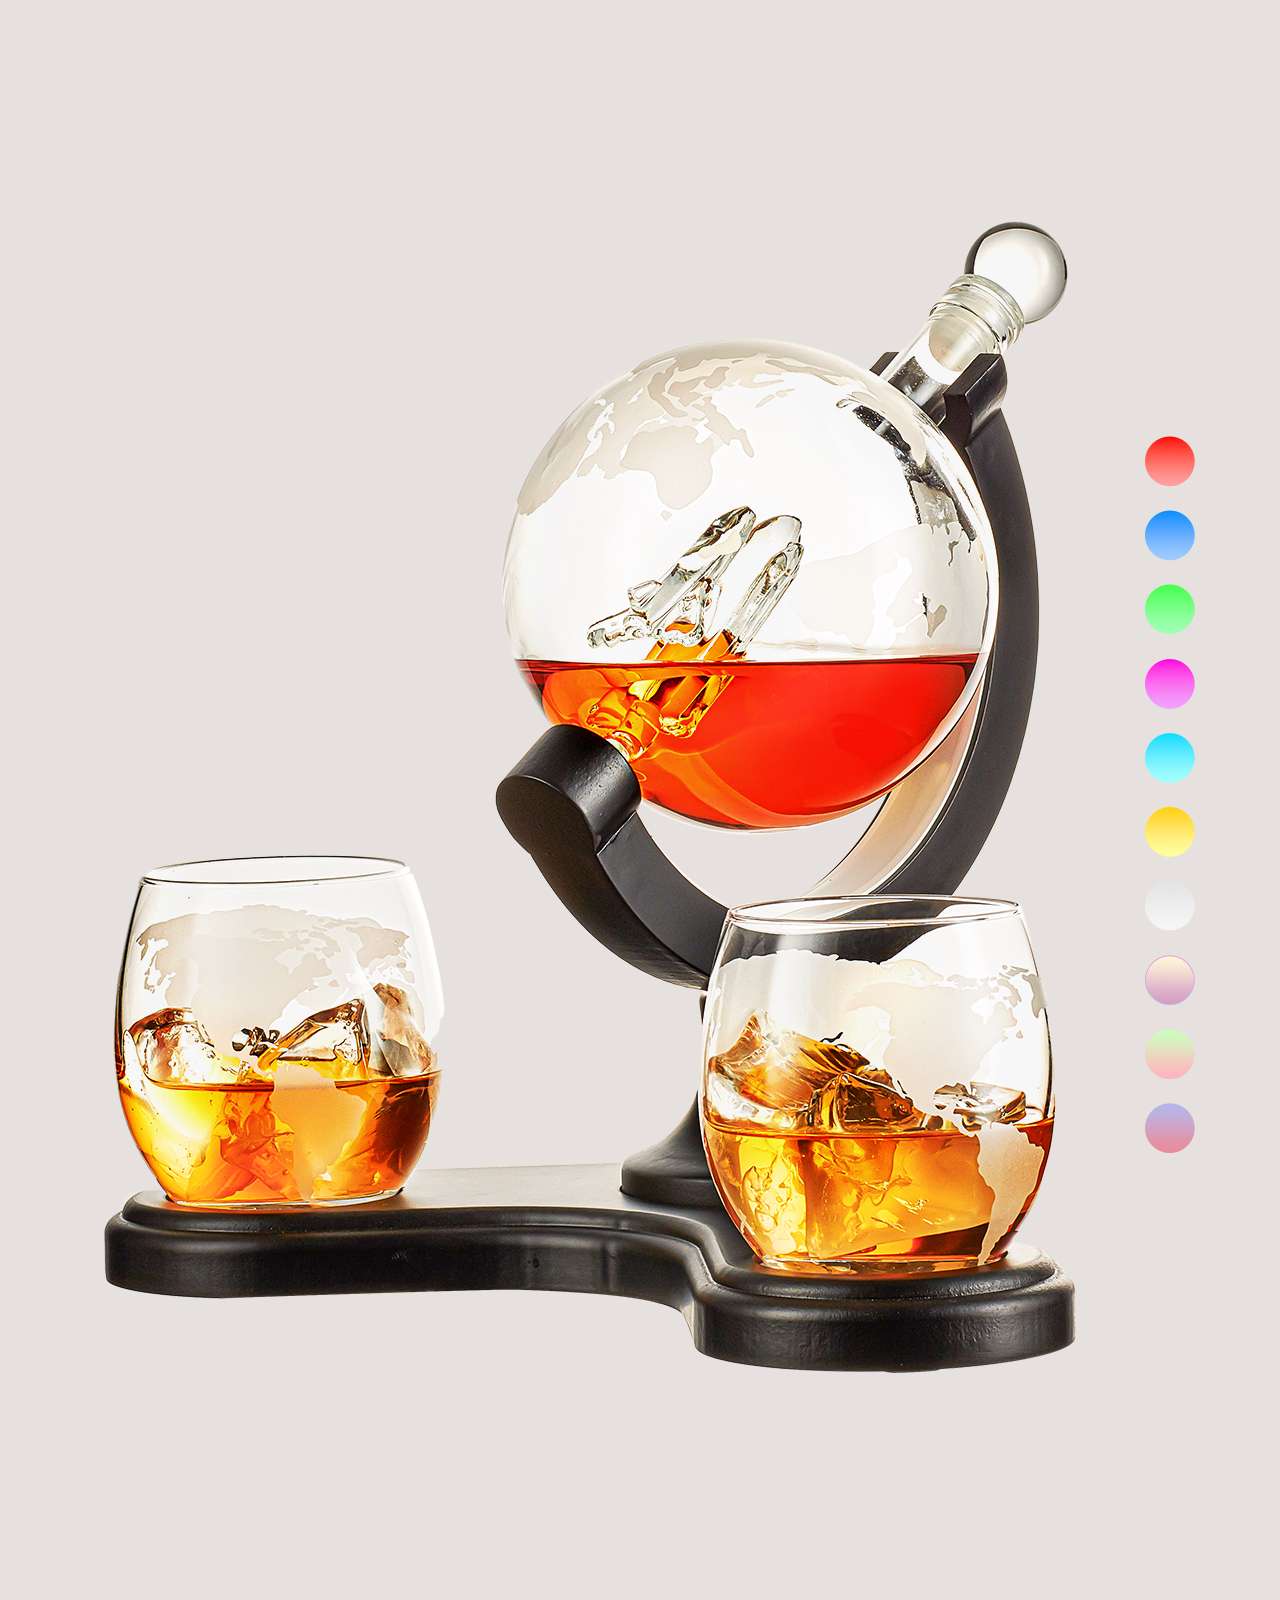 Kollea 30.4 Oz Globe Whiskey Decanter Set with 2 whiskey glasses, Best Christmas Gift for him dad-Kollea whiskey decanter